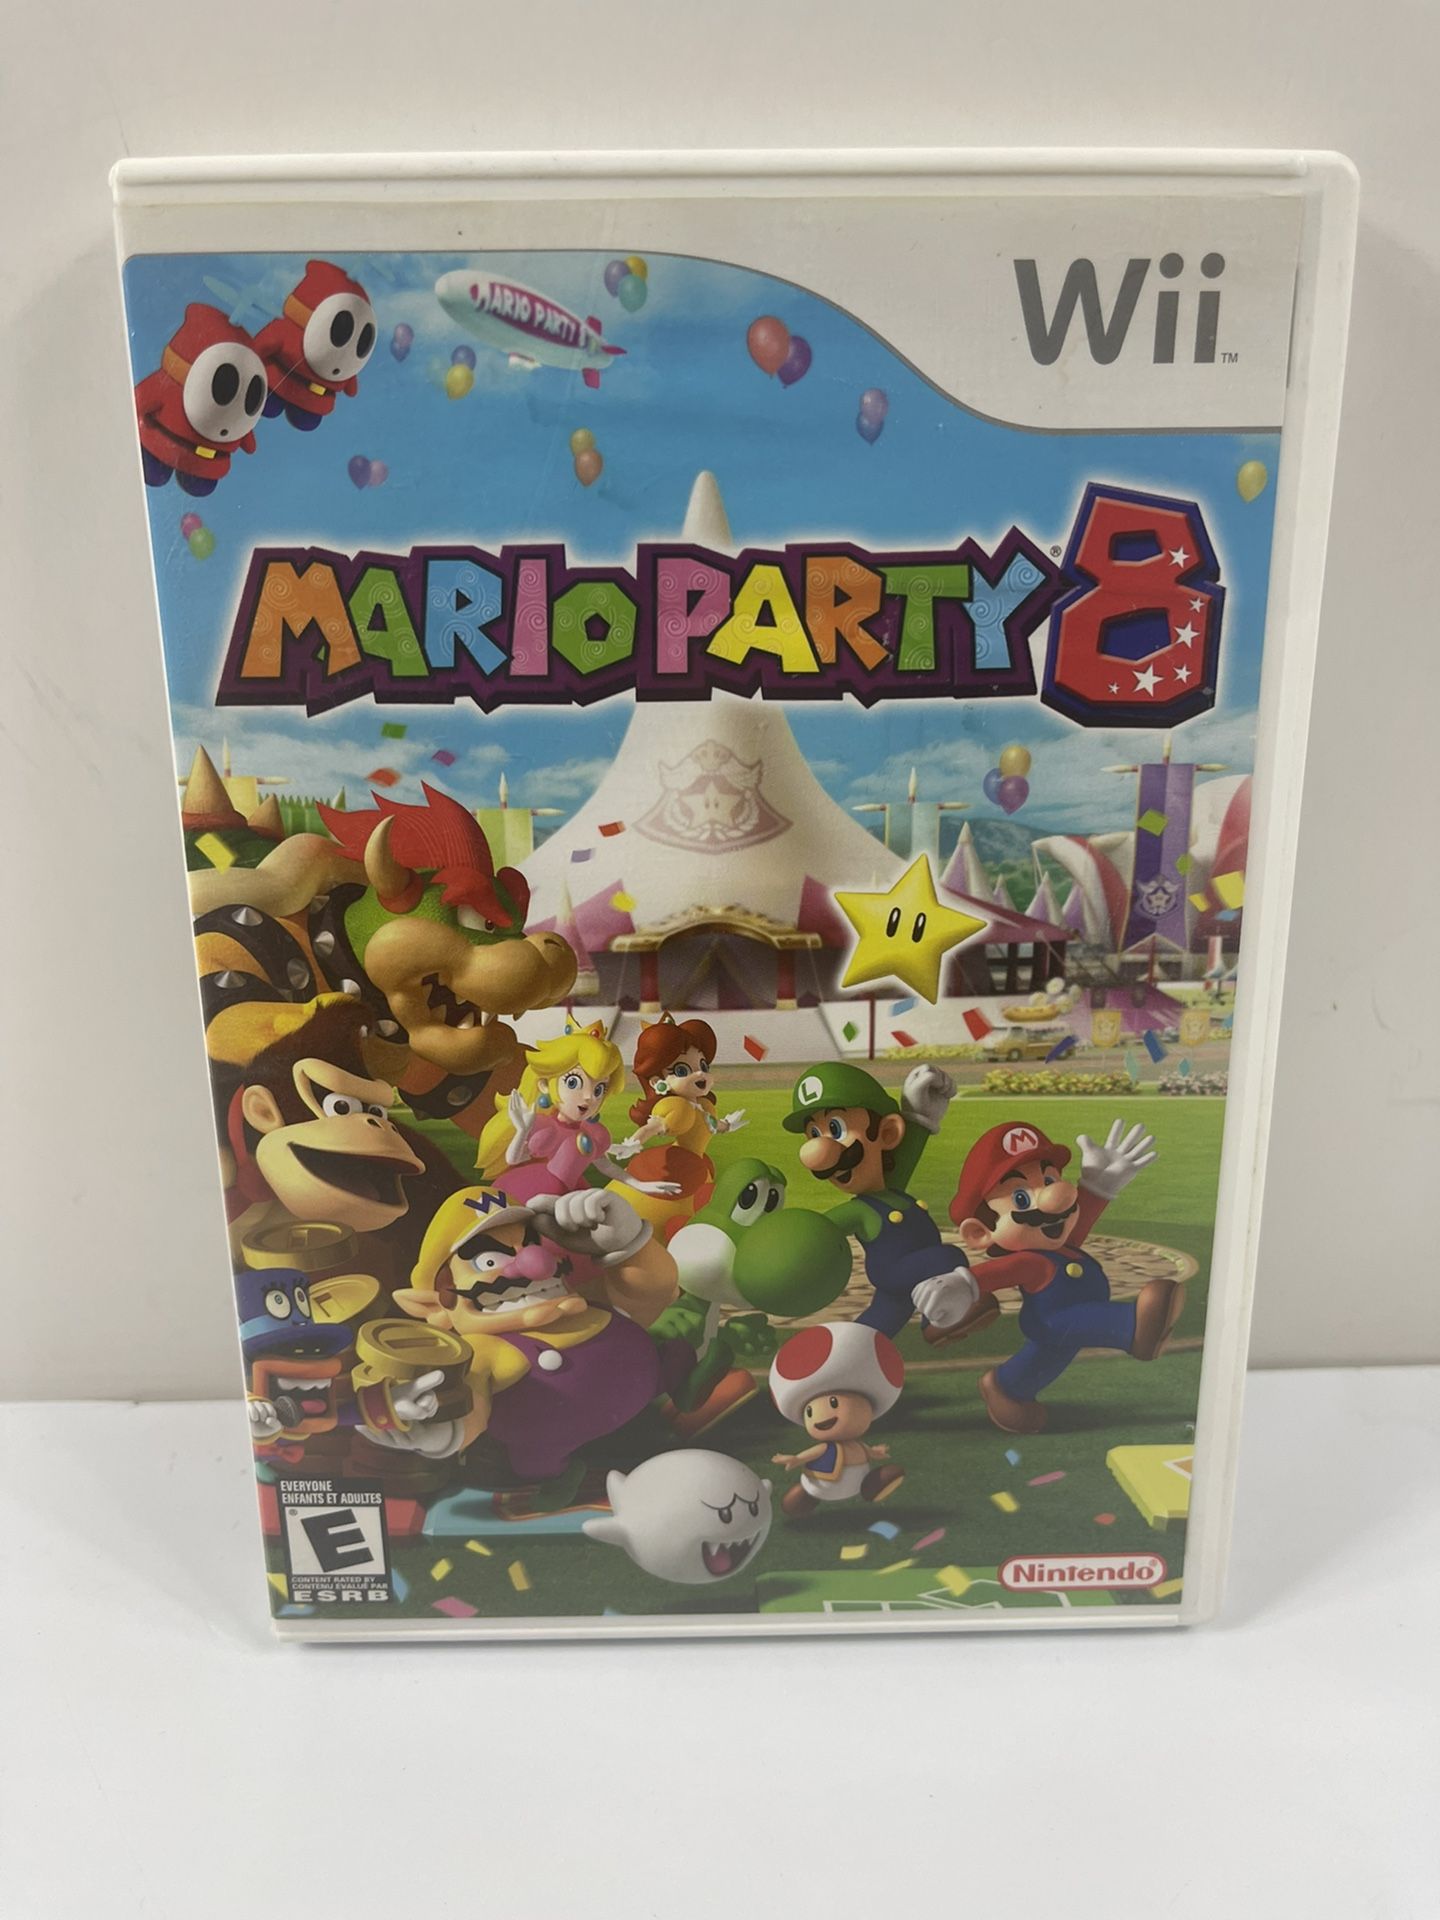 Mario Party 8 (2007) Nintendo Wii - Complete w/ Manual - TESTED and WORKING! 